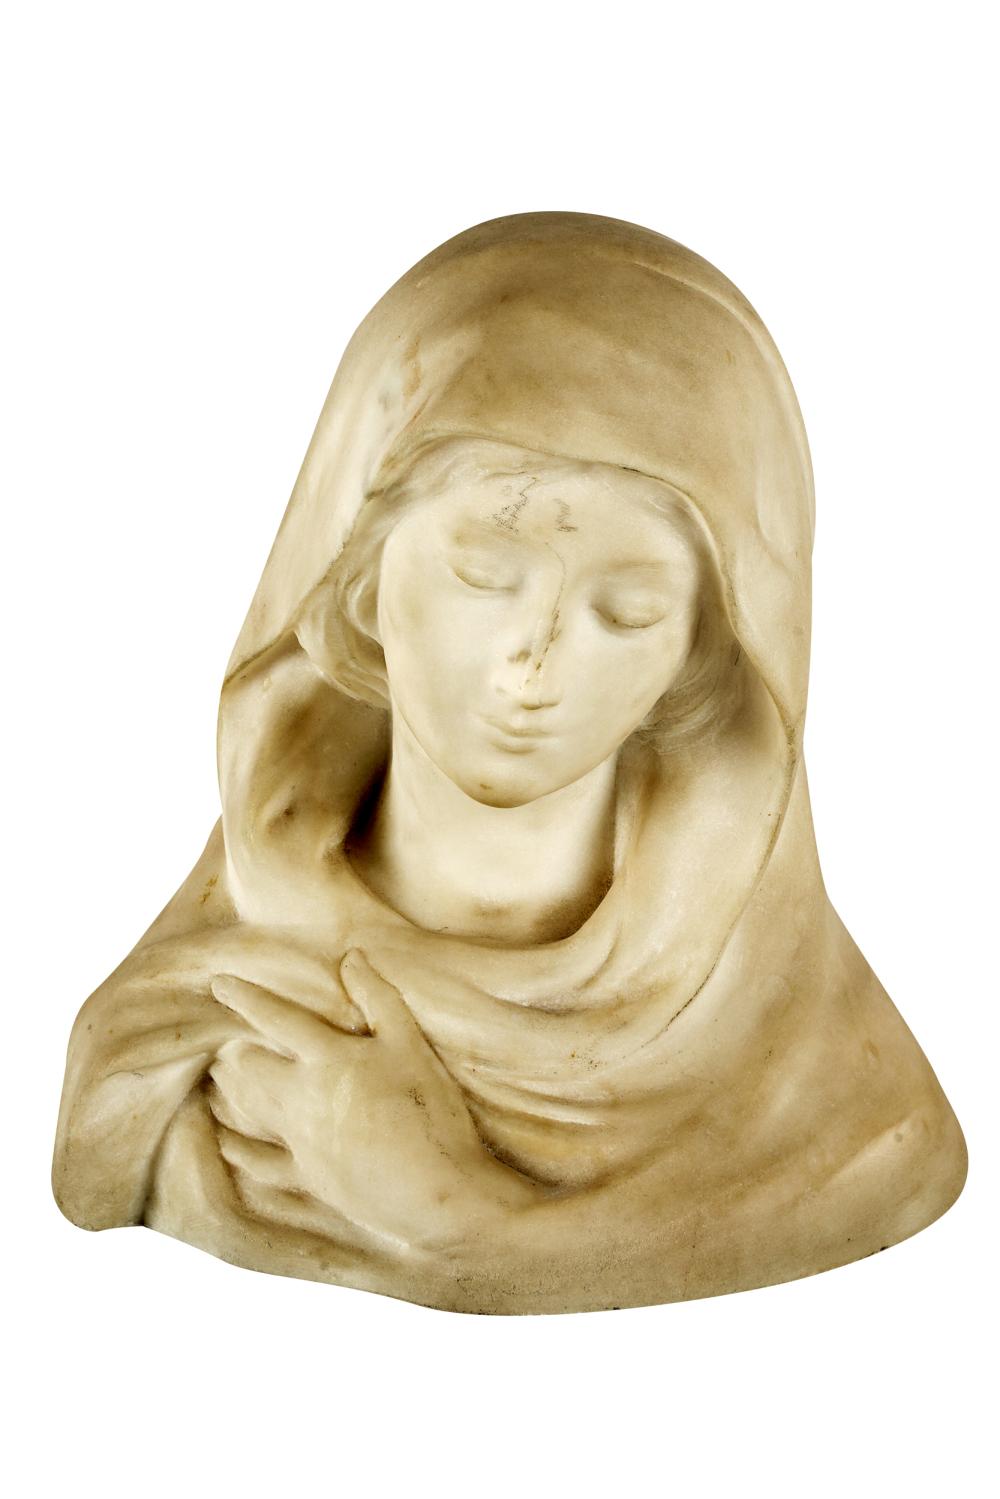 CARVED MARBLE BUST OF A WOMANsigned